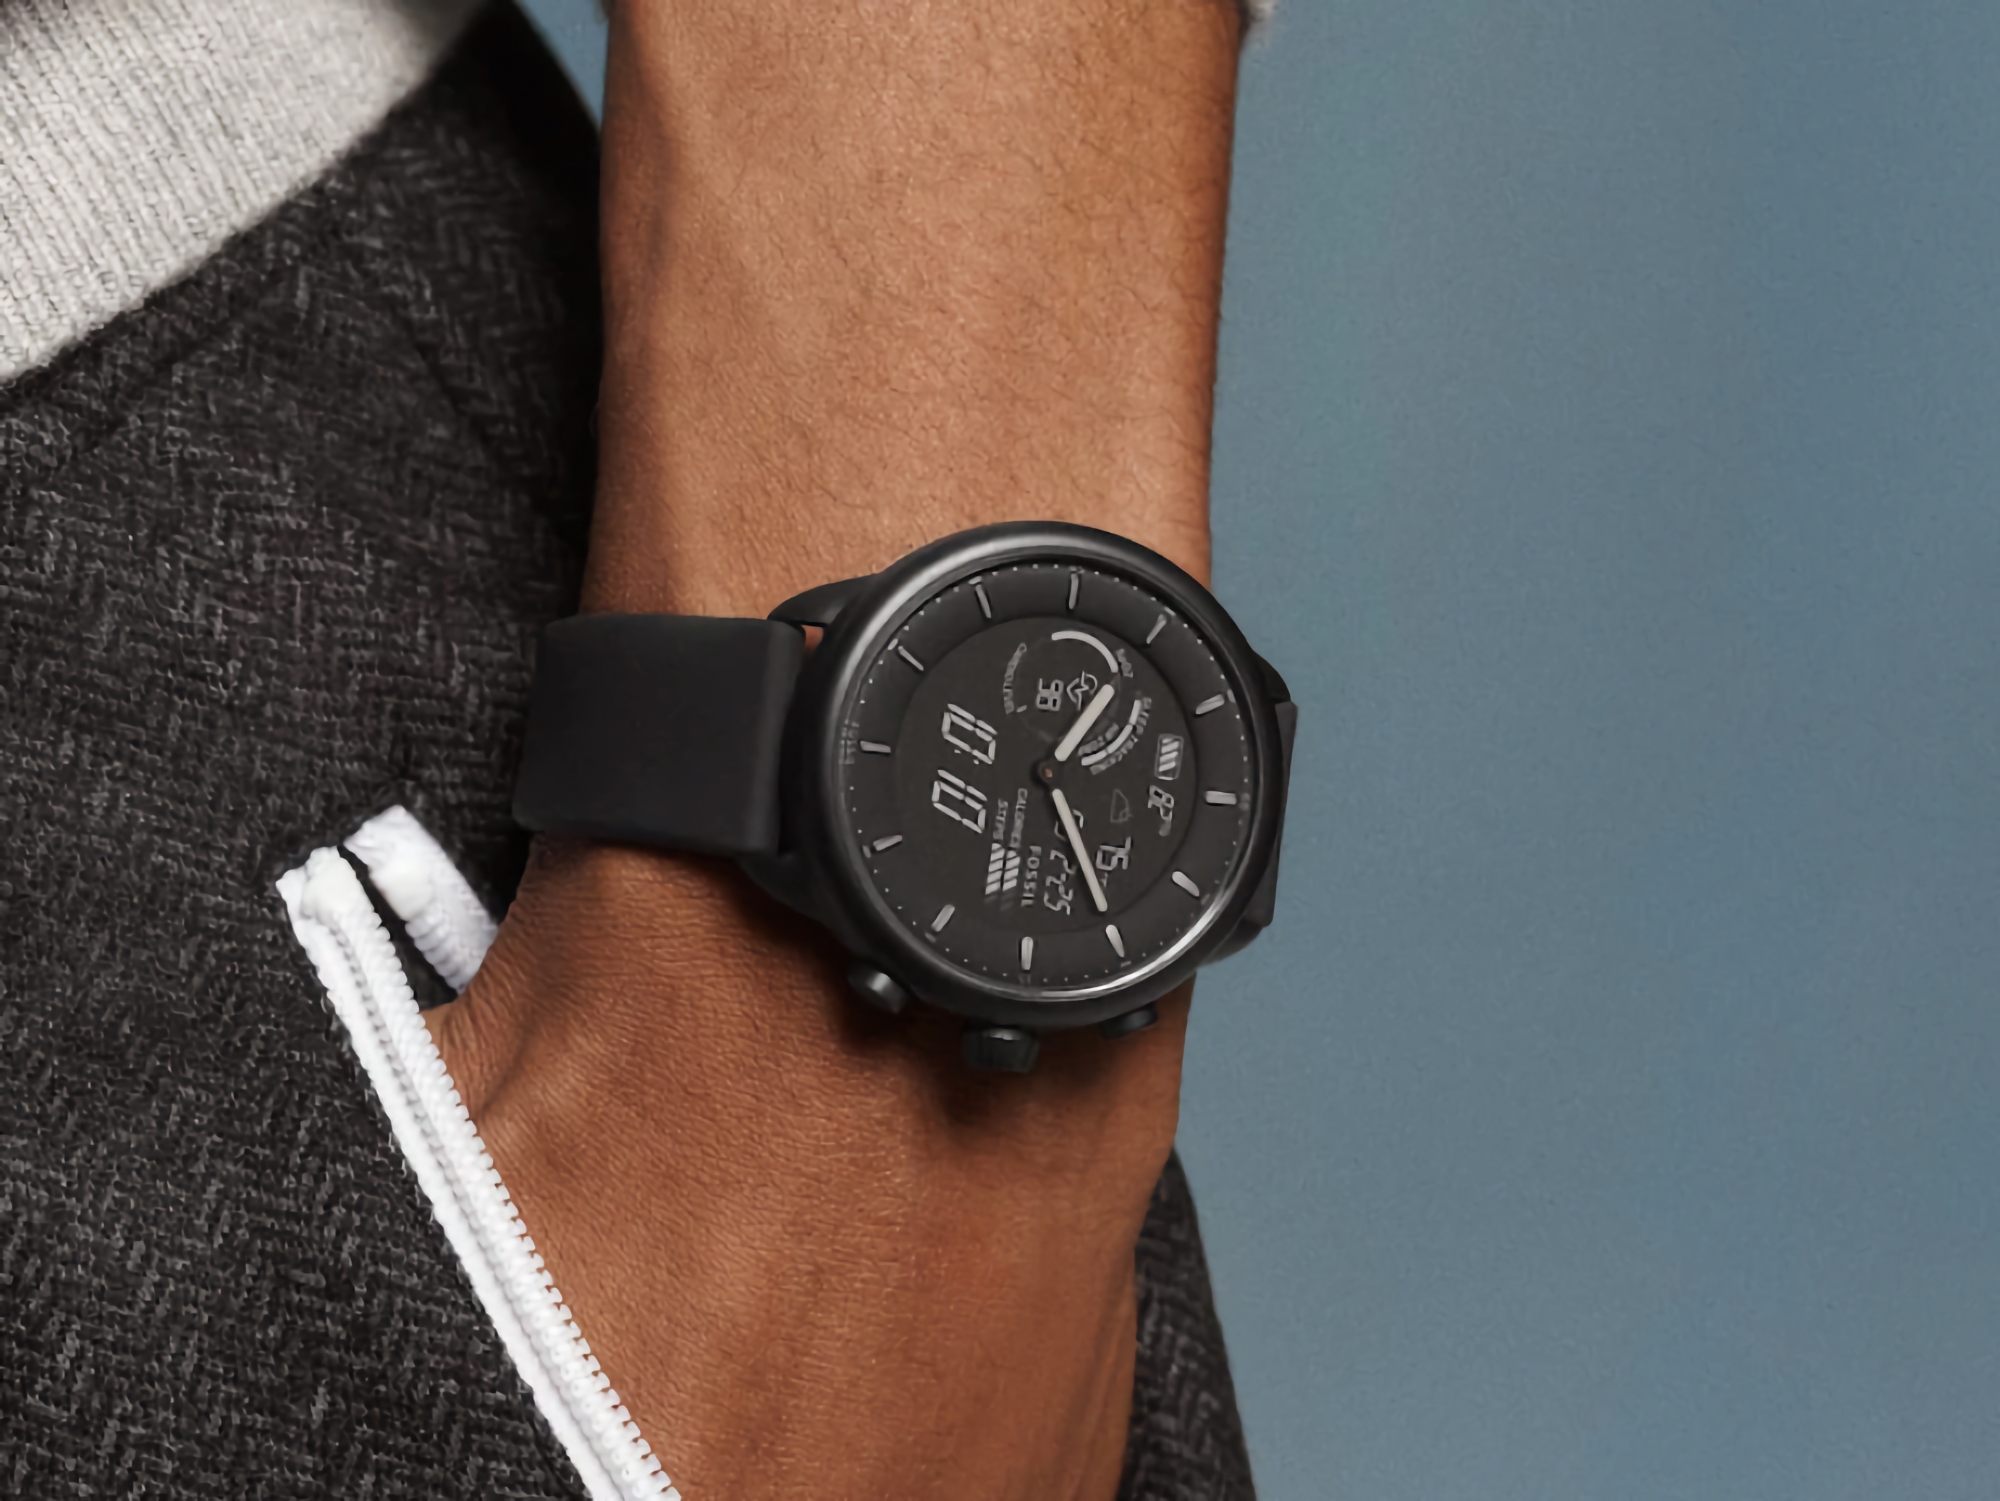 Fossil Gen 6 Hybrid Wellness Edition: a hybrid smart watch with SpO2 sensor, Amazon Alexa support and up to 14 days of work